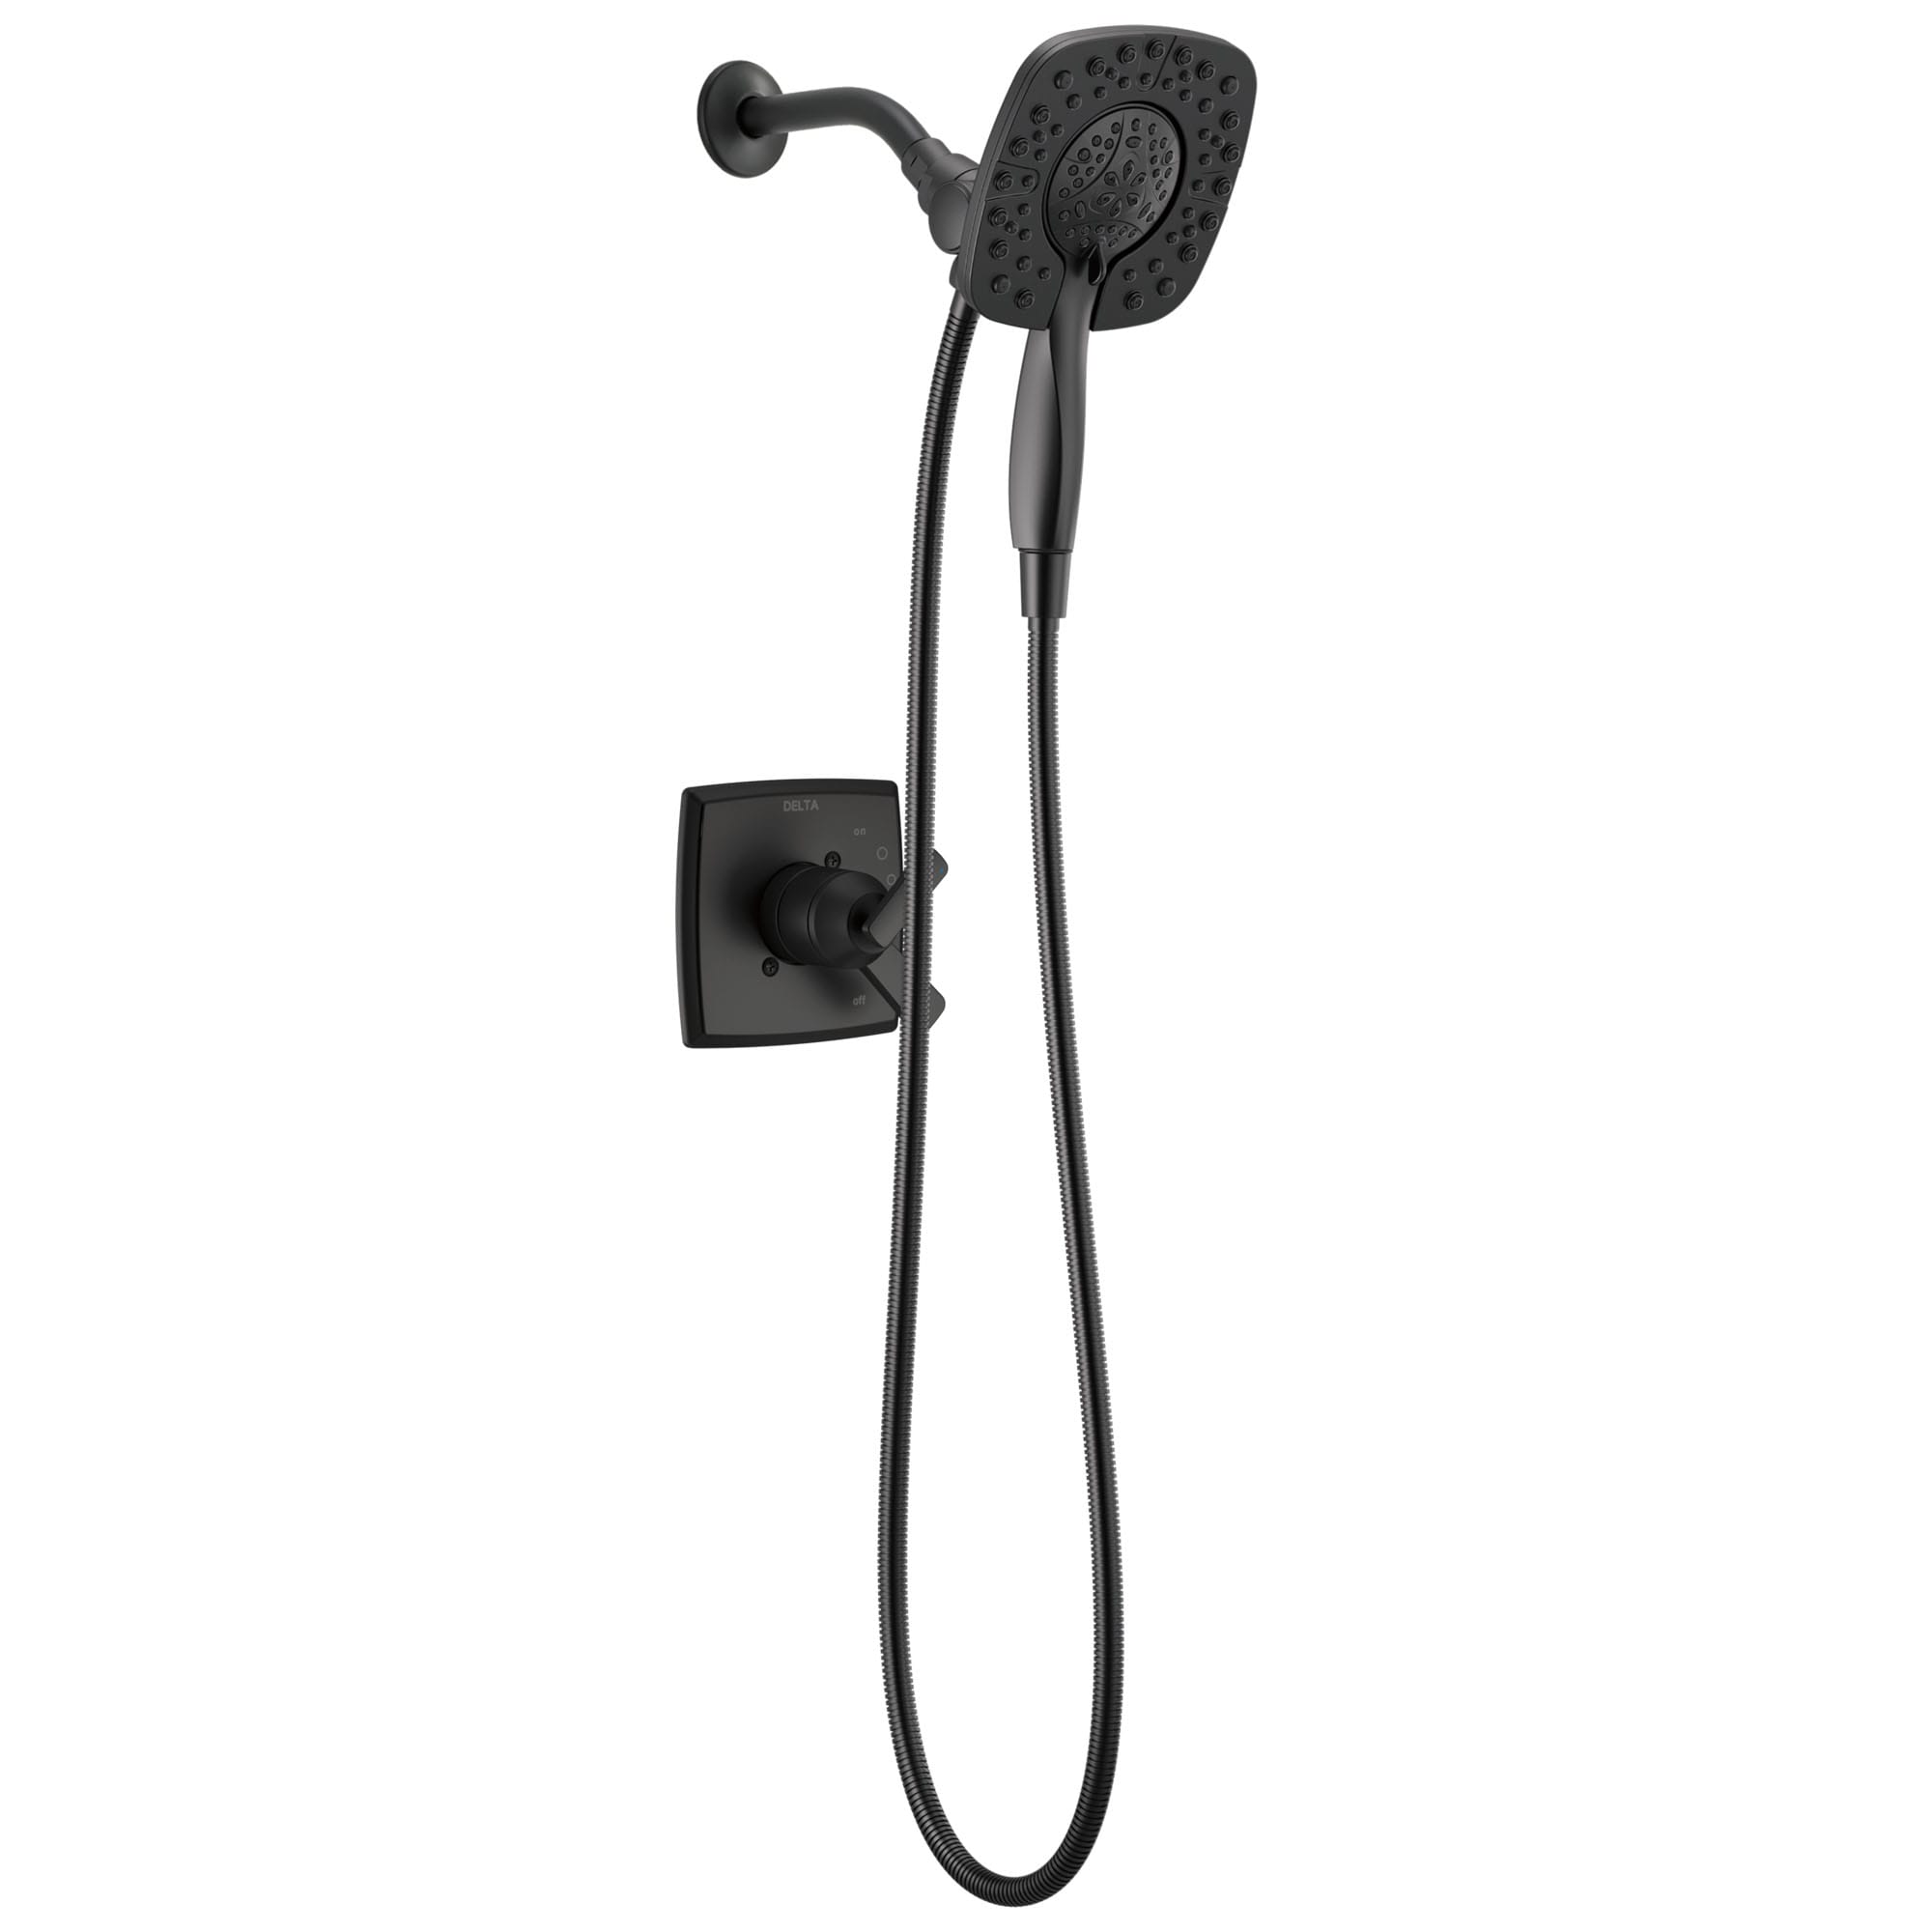 Delta Ashlyn Monitor 17 Series Shower Trim with In2ition , Black, T17264-BL-I